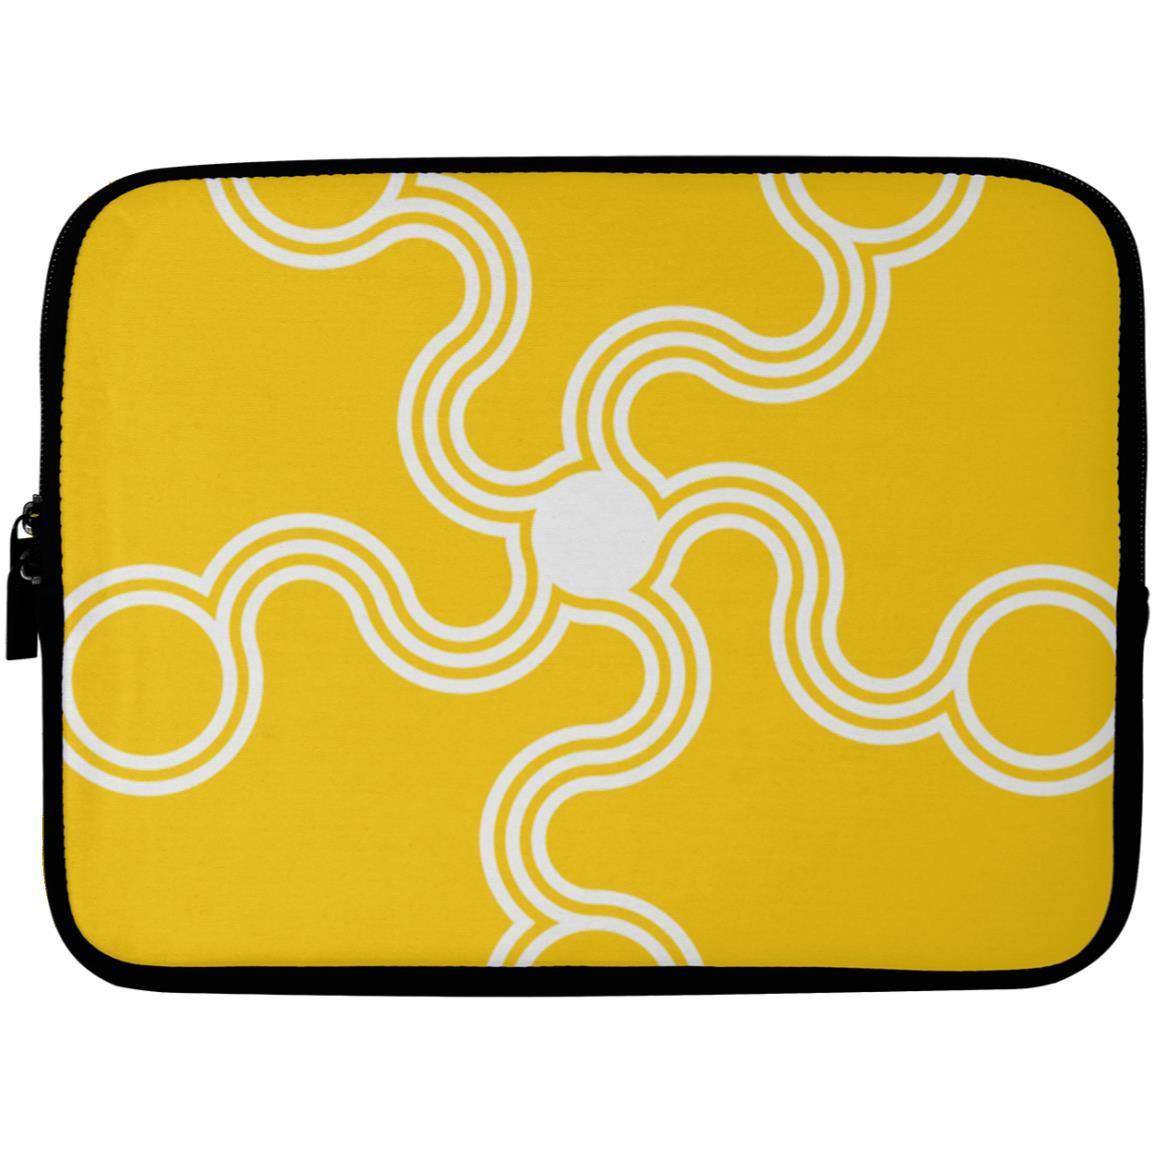 Crop Circle Laptop Sleeve - Willoughby - Shapes of Wisdom